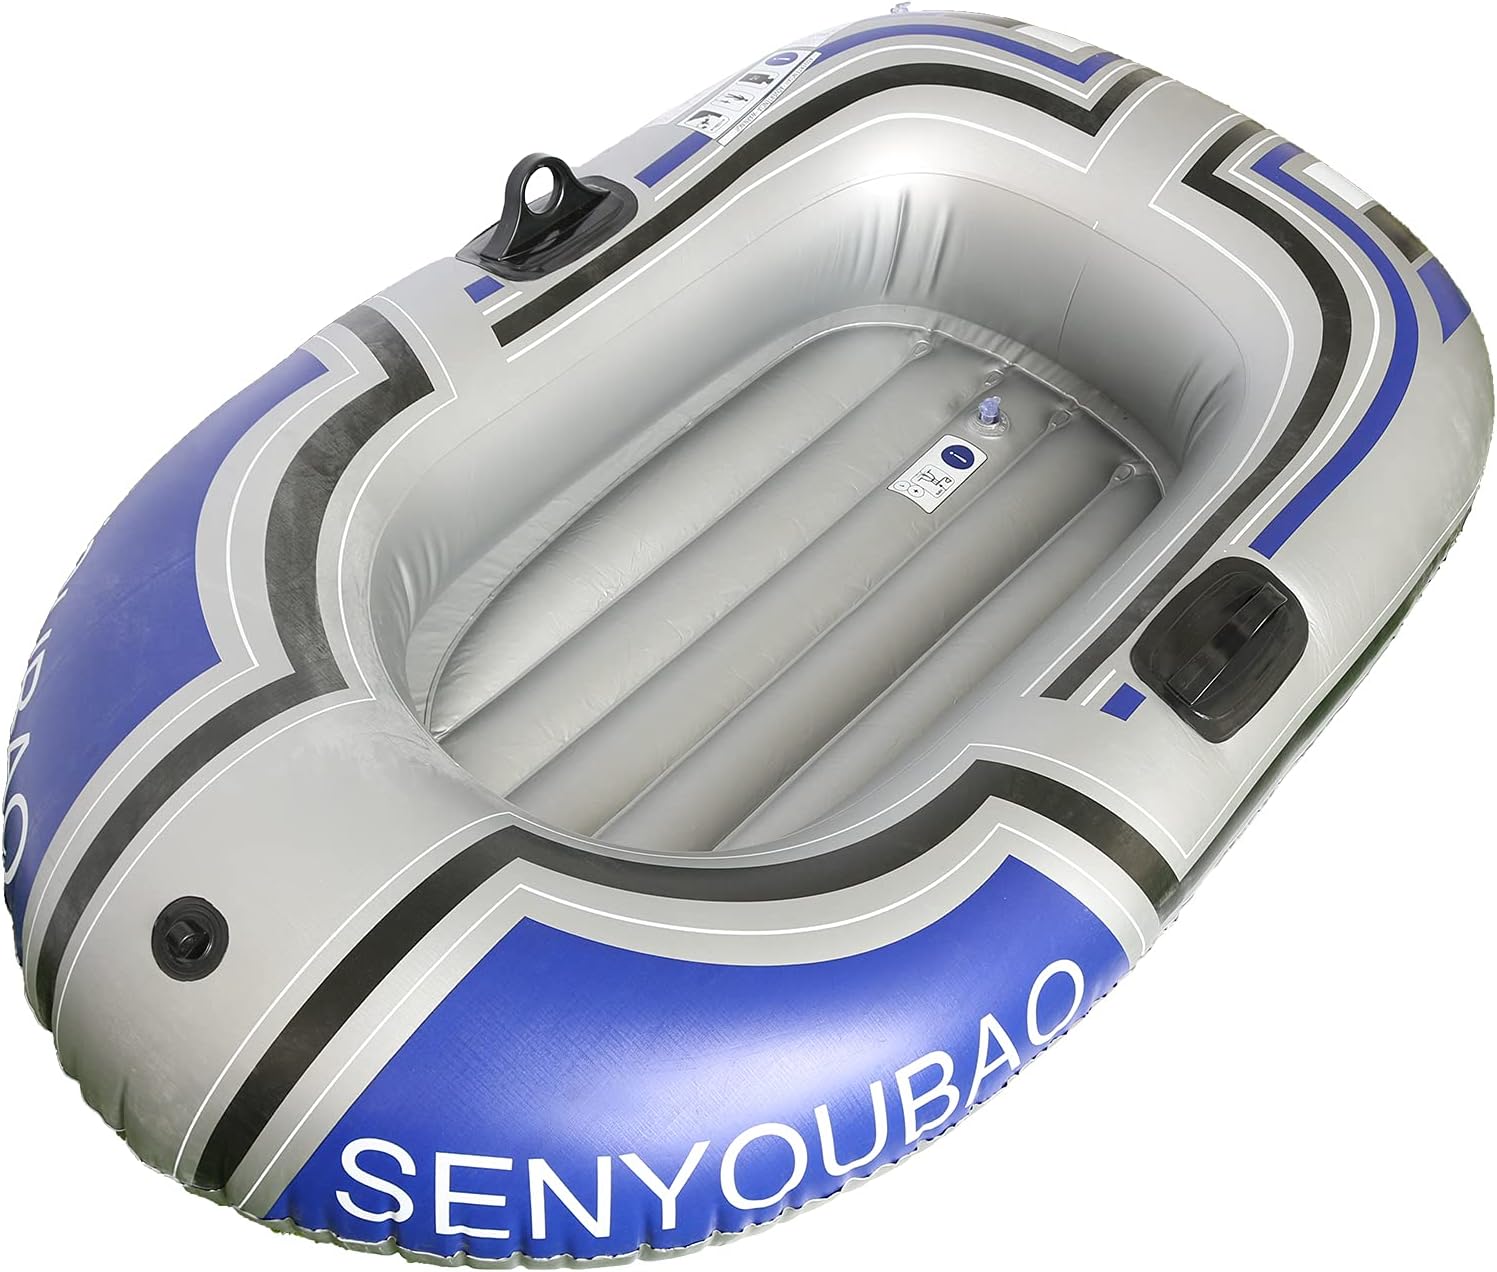 PLKO Inflatable Boat Review